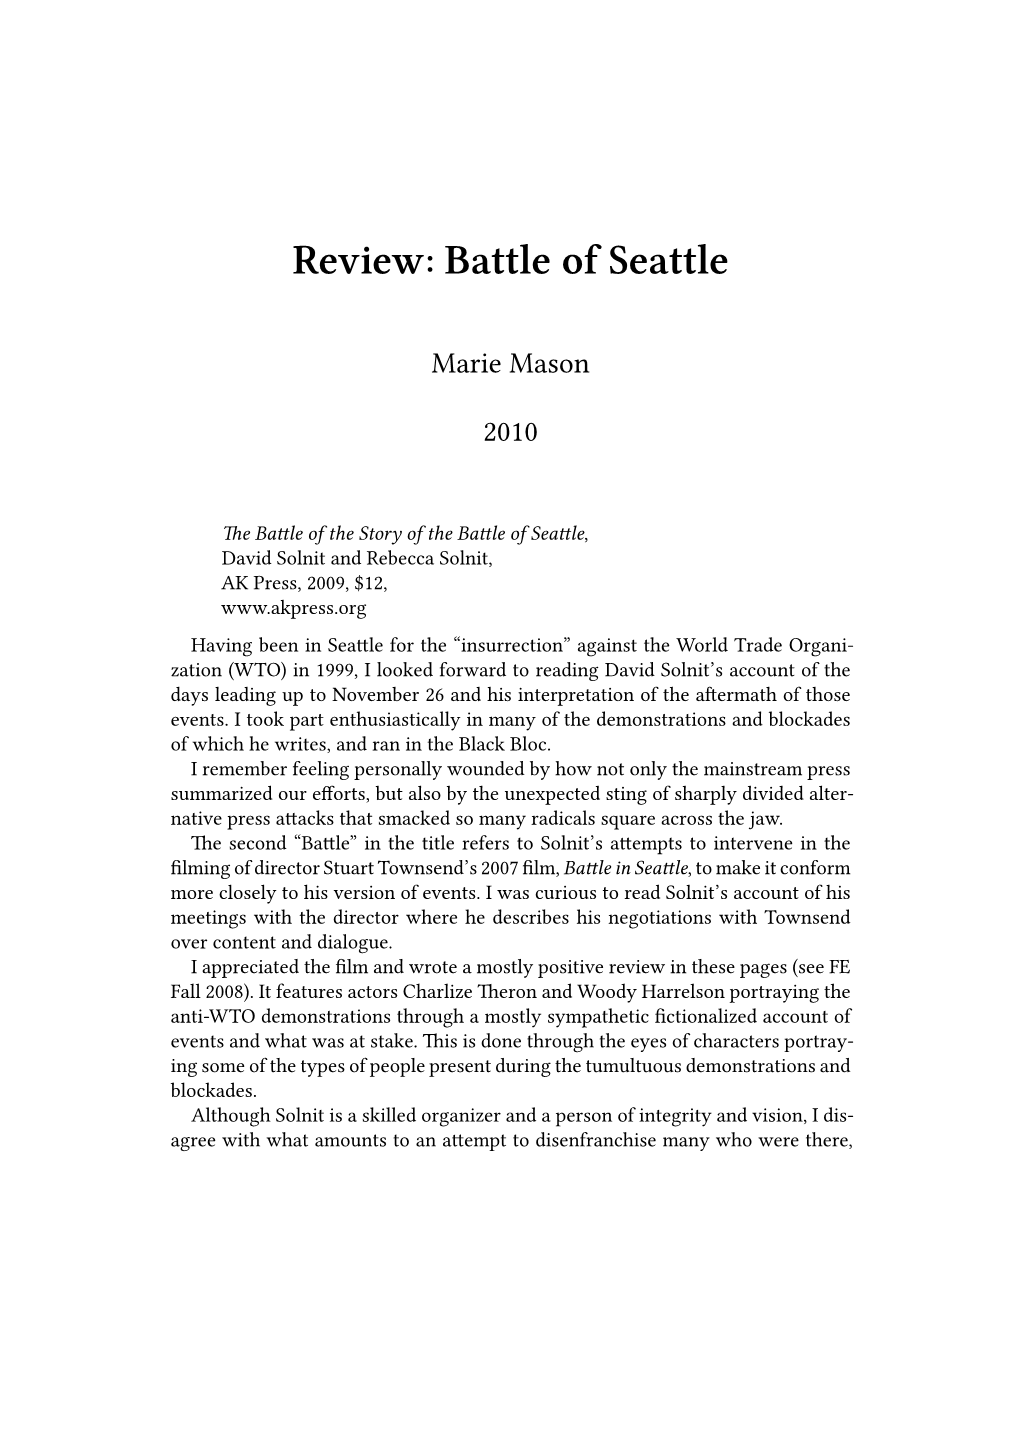 Review: Battle of Seattle